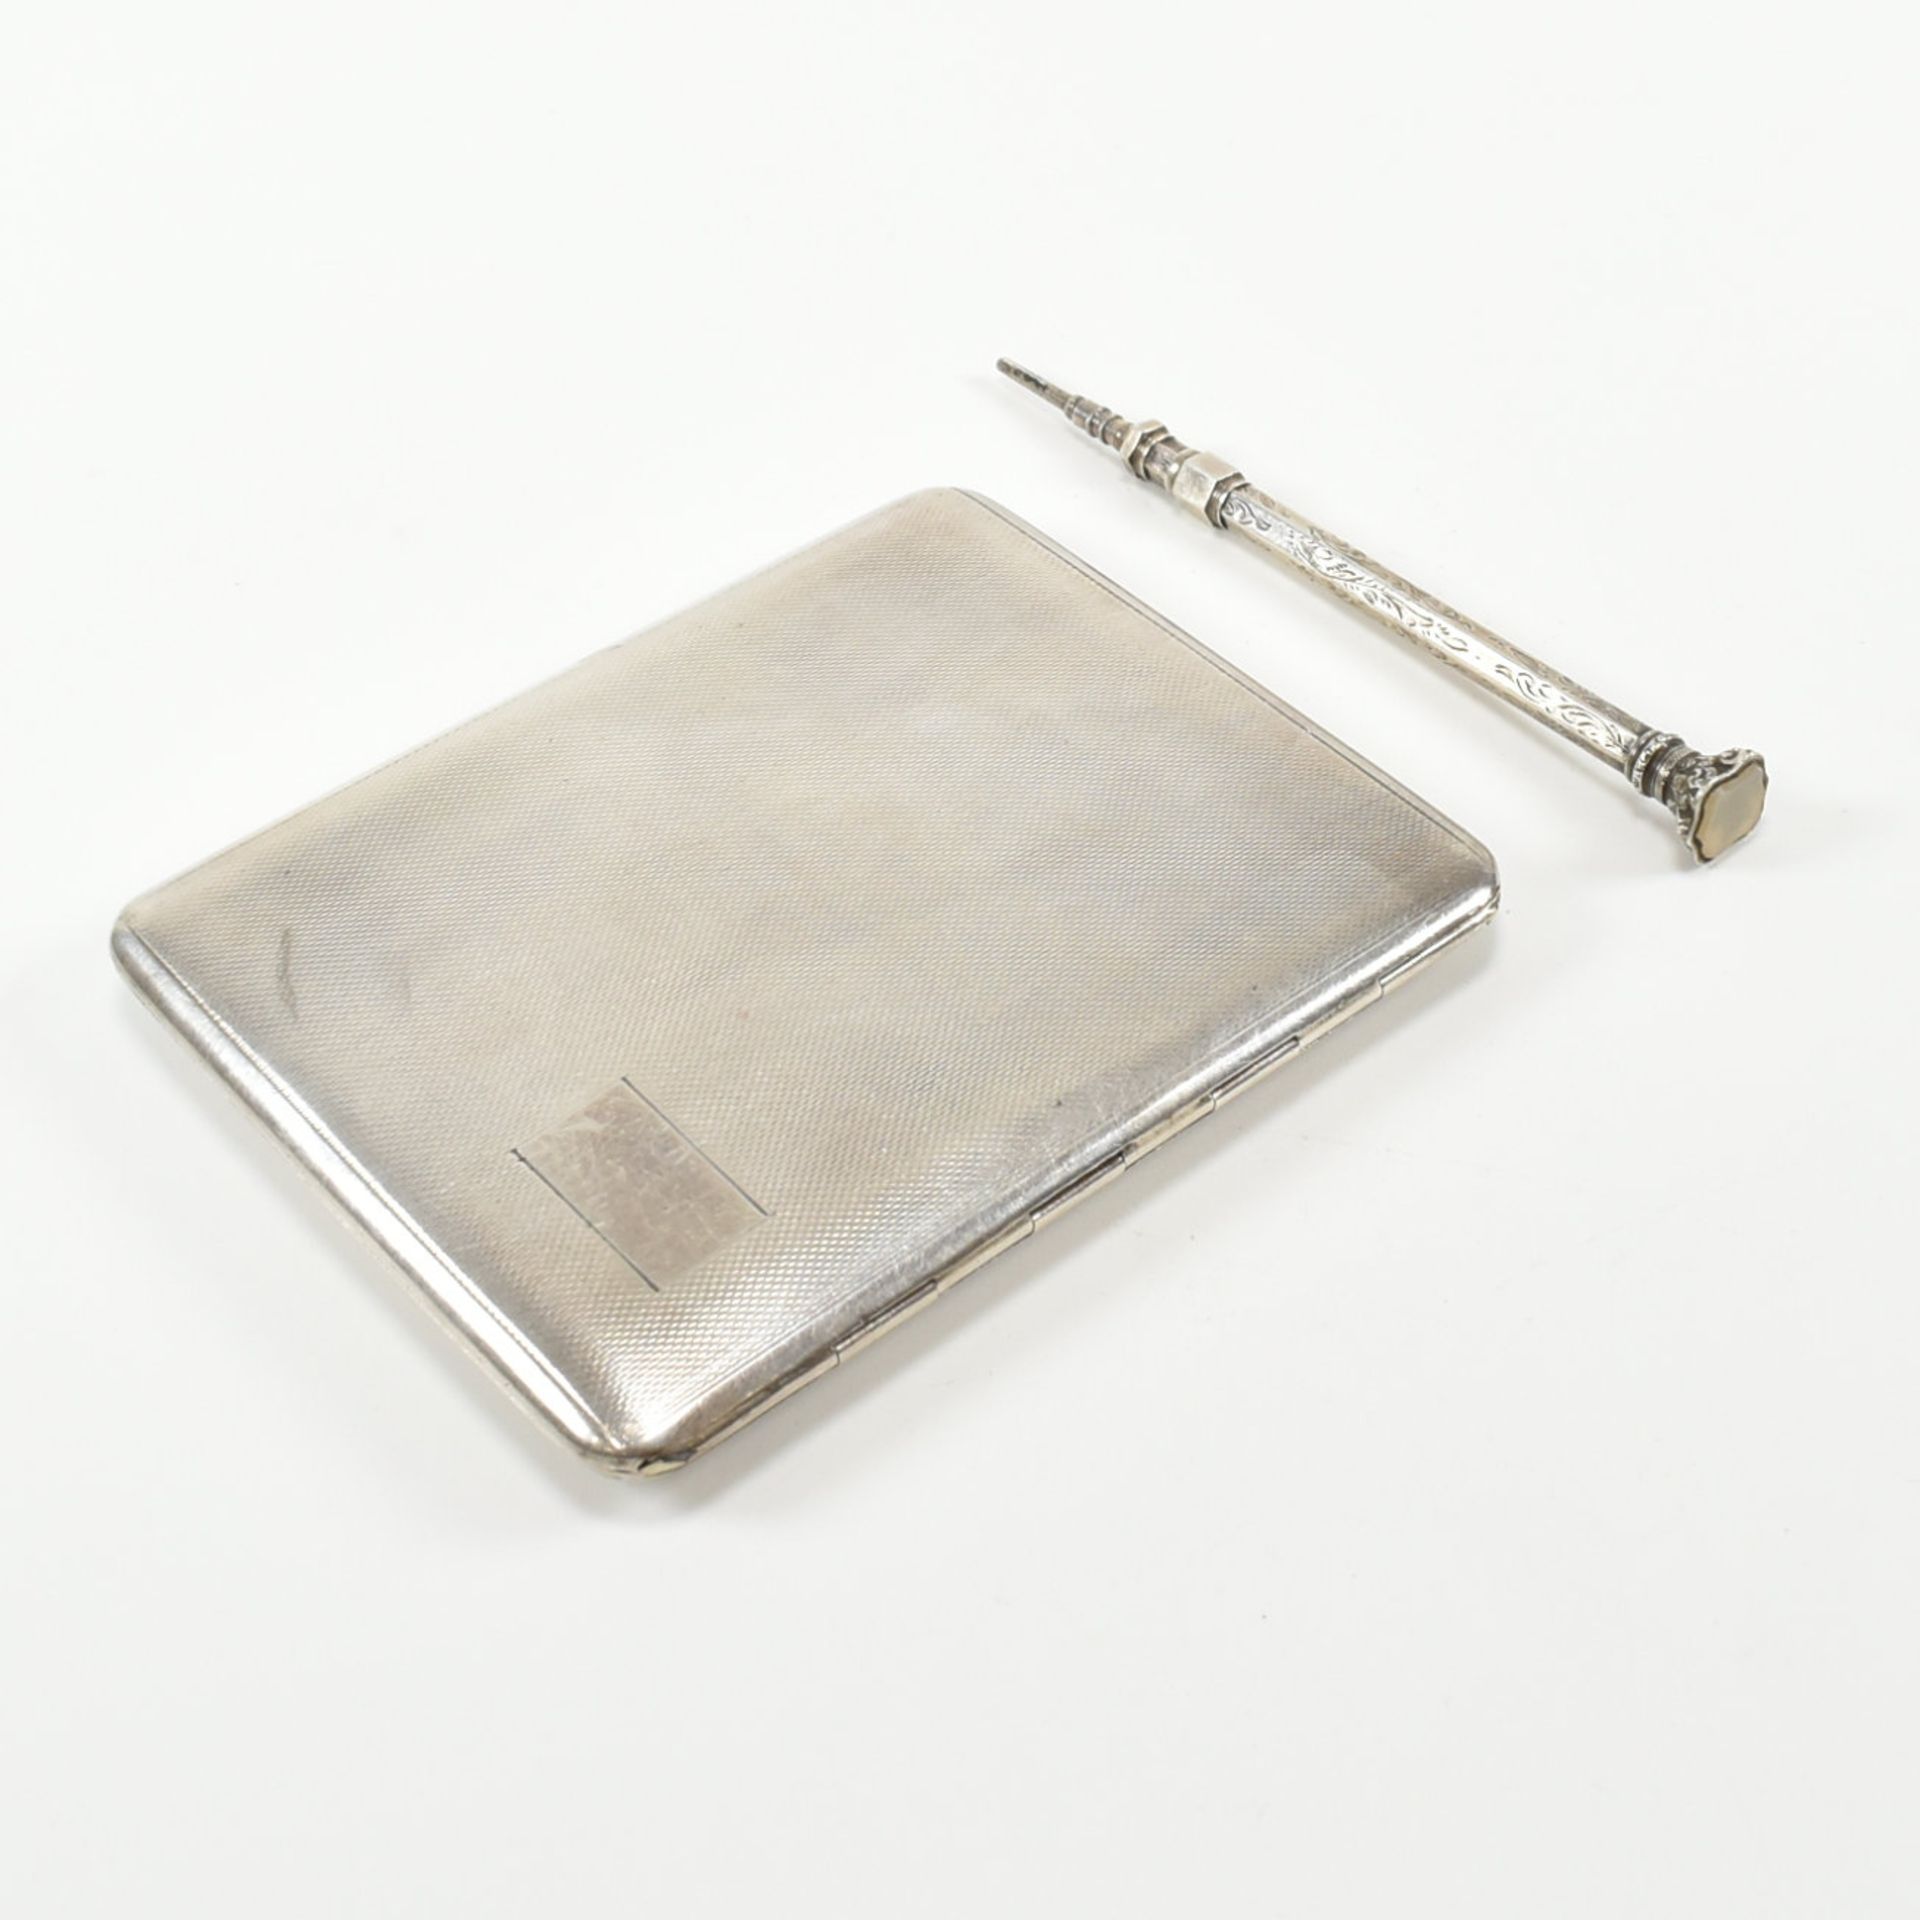 STERLING SILVER CIGARETTE CASE & A SILVER PROPELLING PENCIL - Image 3 of 8